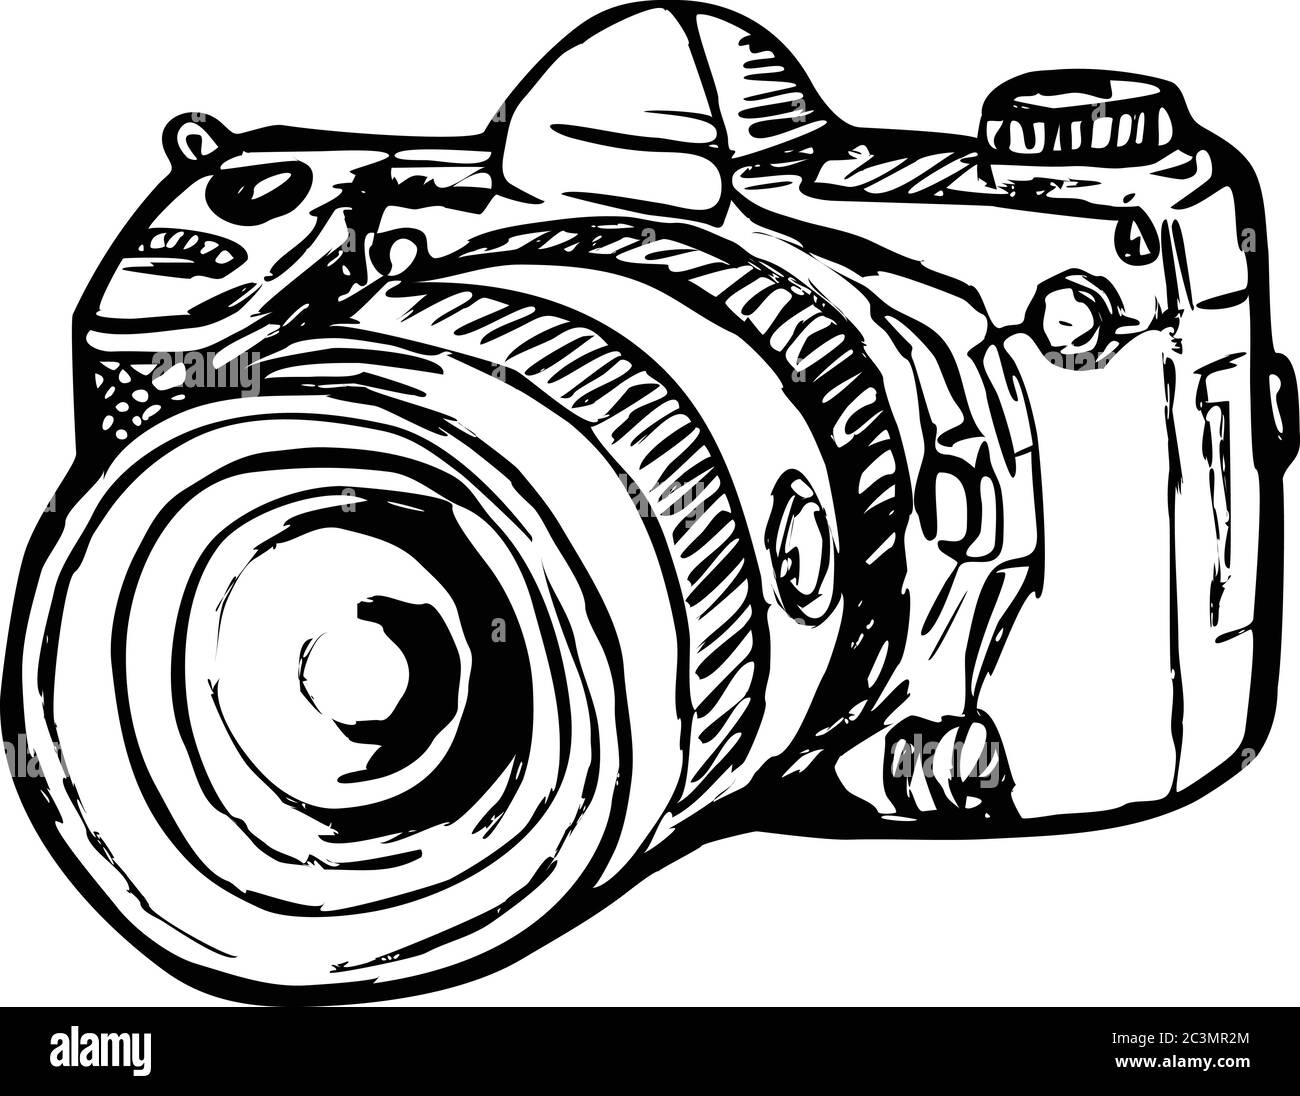 Drawing Sketch Style Illustration Of A Dslr Digital Still Image Camera With Zoom Lens Viewed From Side On Isolated White Background In Black And White Stock Vector Image Art Alamy In today's modern era, digital photography has become necessity and for this we need camera. https www alamy com drawing sketch style illustration of a dslr digital still image camera with zoom lens viewed from side on isolated white background in black and white image363718844 html